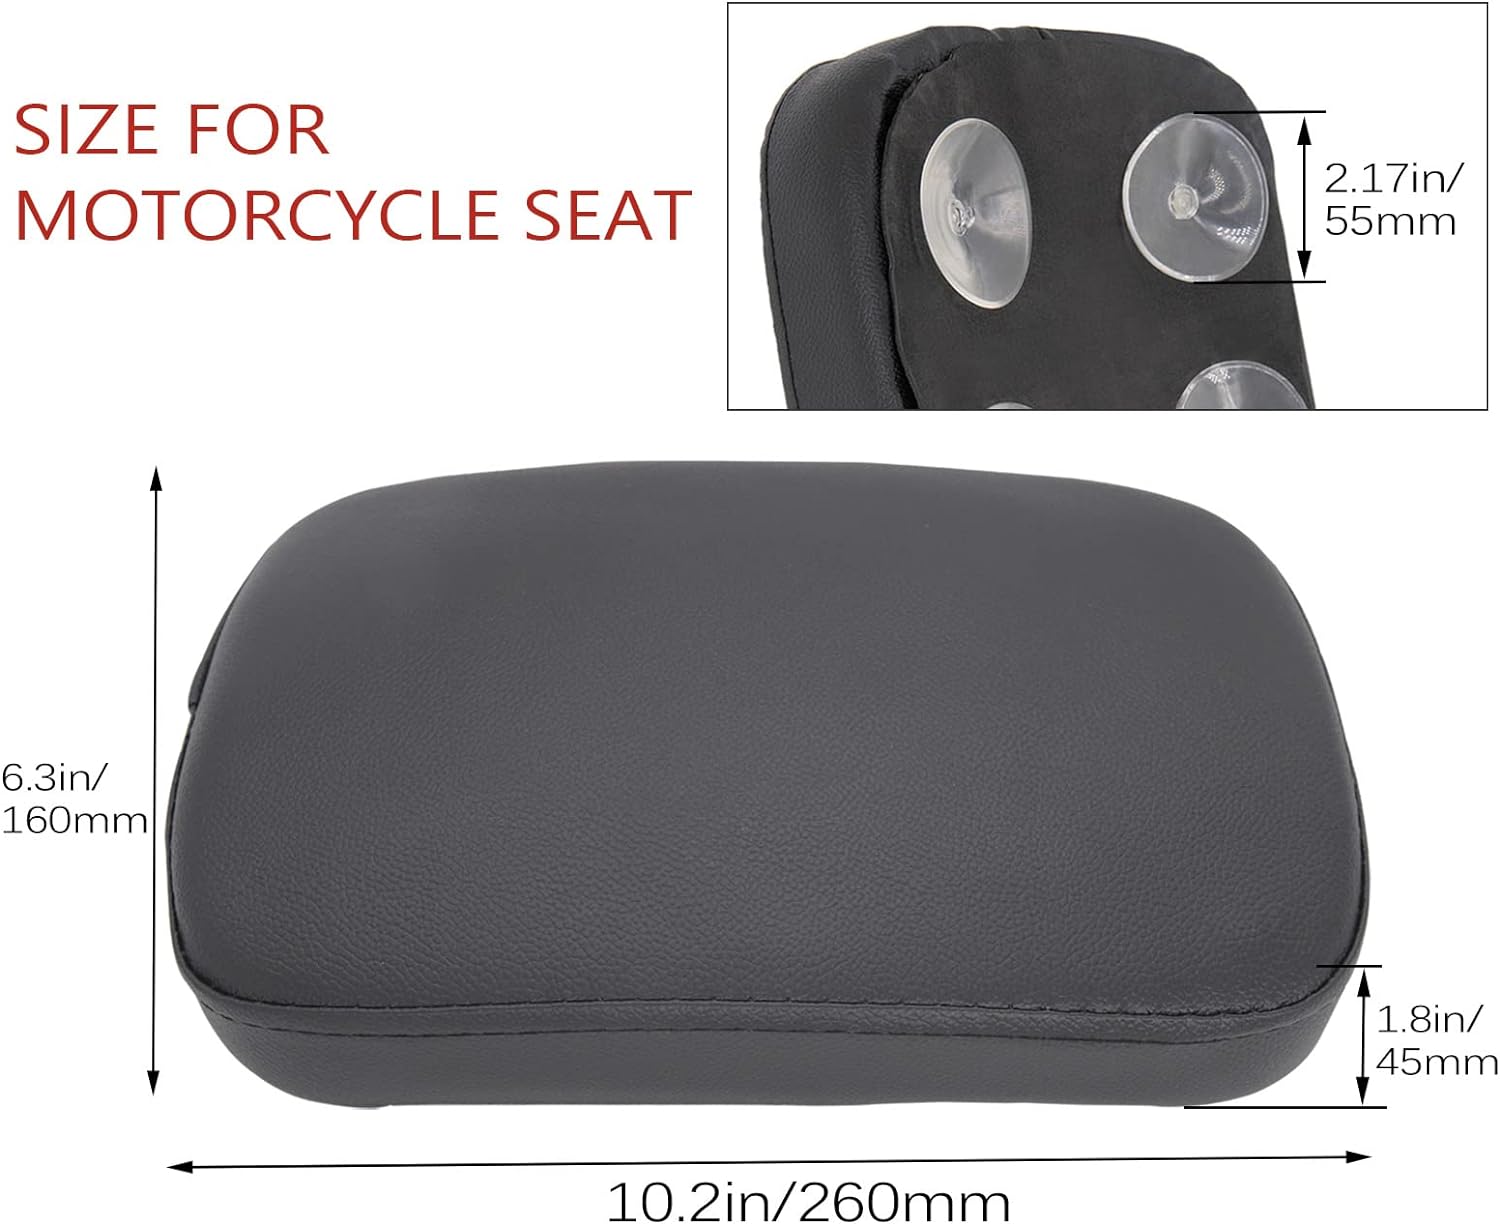 Suction Cup Motorcycle Seat Rectangular Pillion Passenger Pad Seat OF Motorcycle 6 Suction Cup Rear Passenger Seat For Harley Sportster XL883, XL1200 Cruiser Chopper Custom - Suction Cup Motorcycle Seat Review